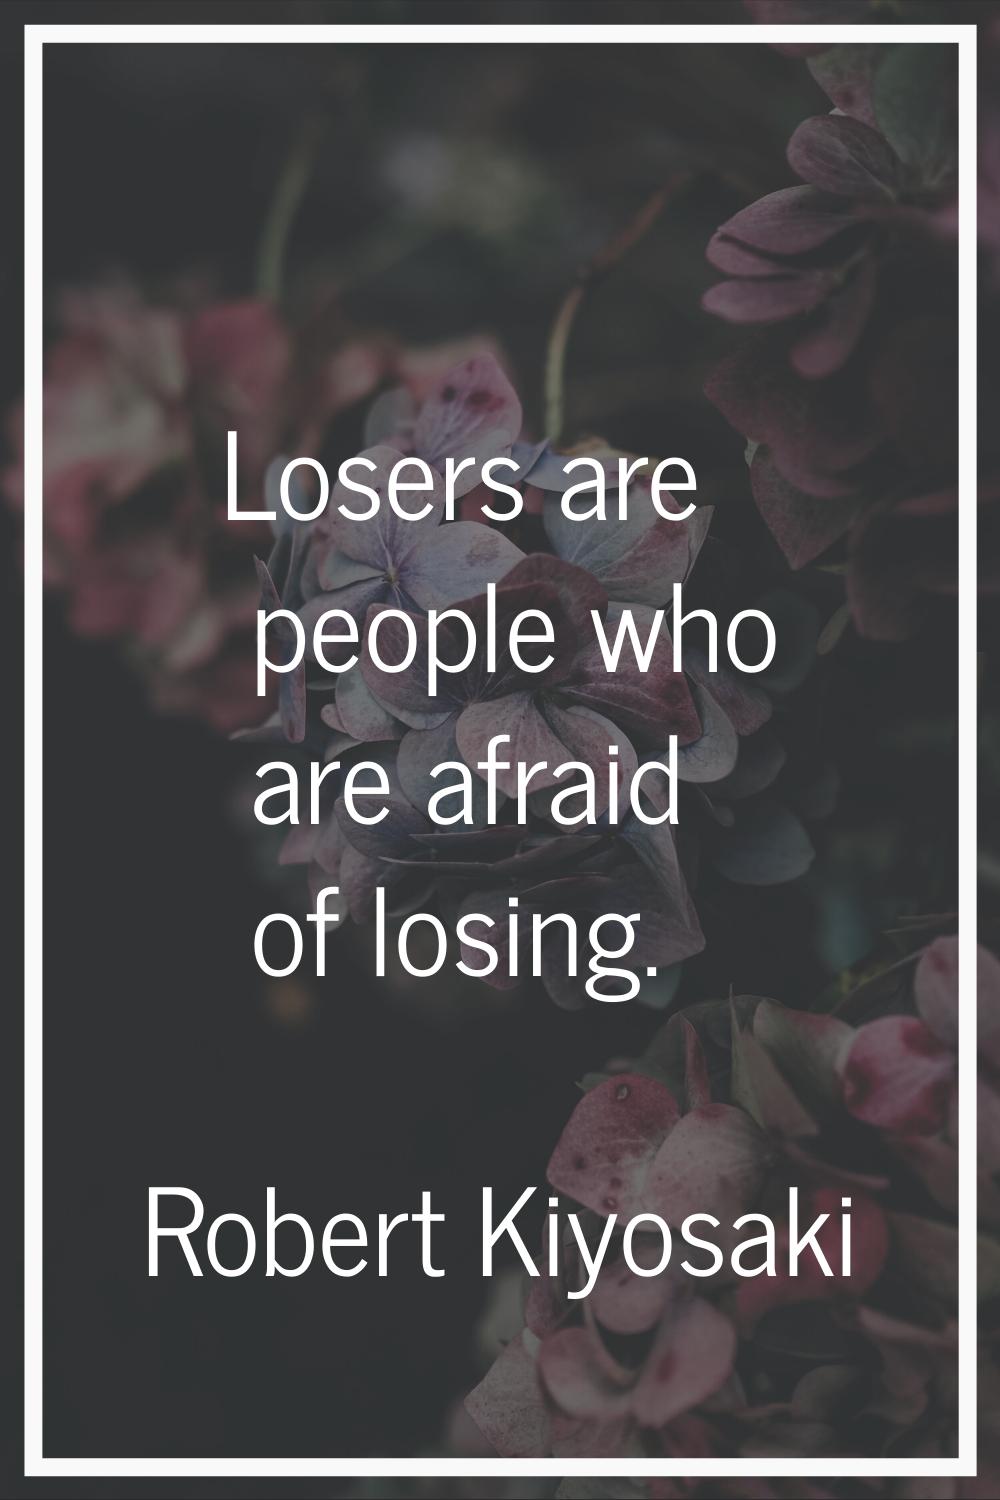 Losers are people who are afraid of losing.